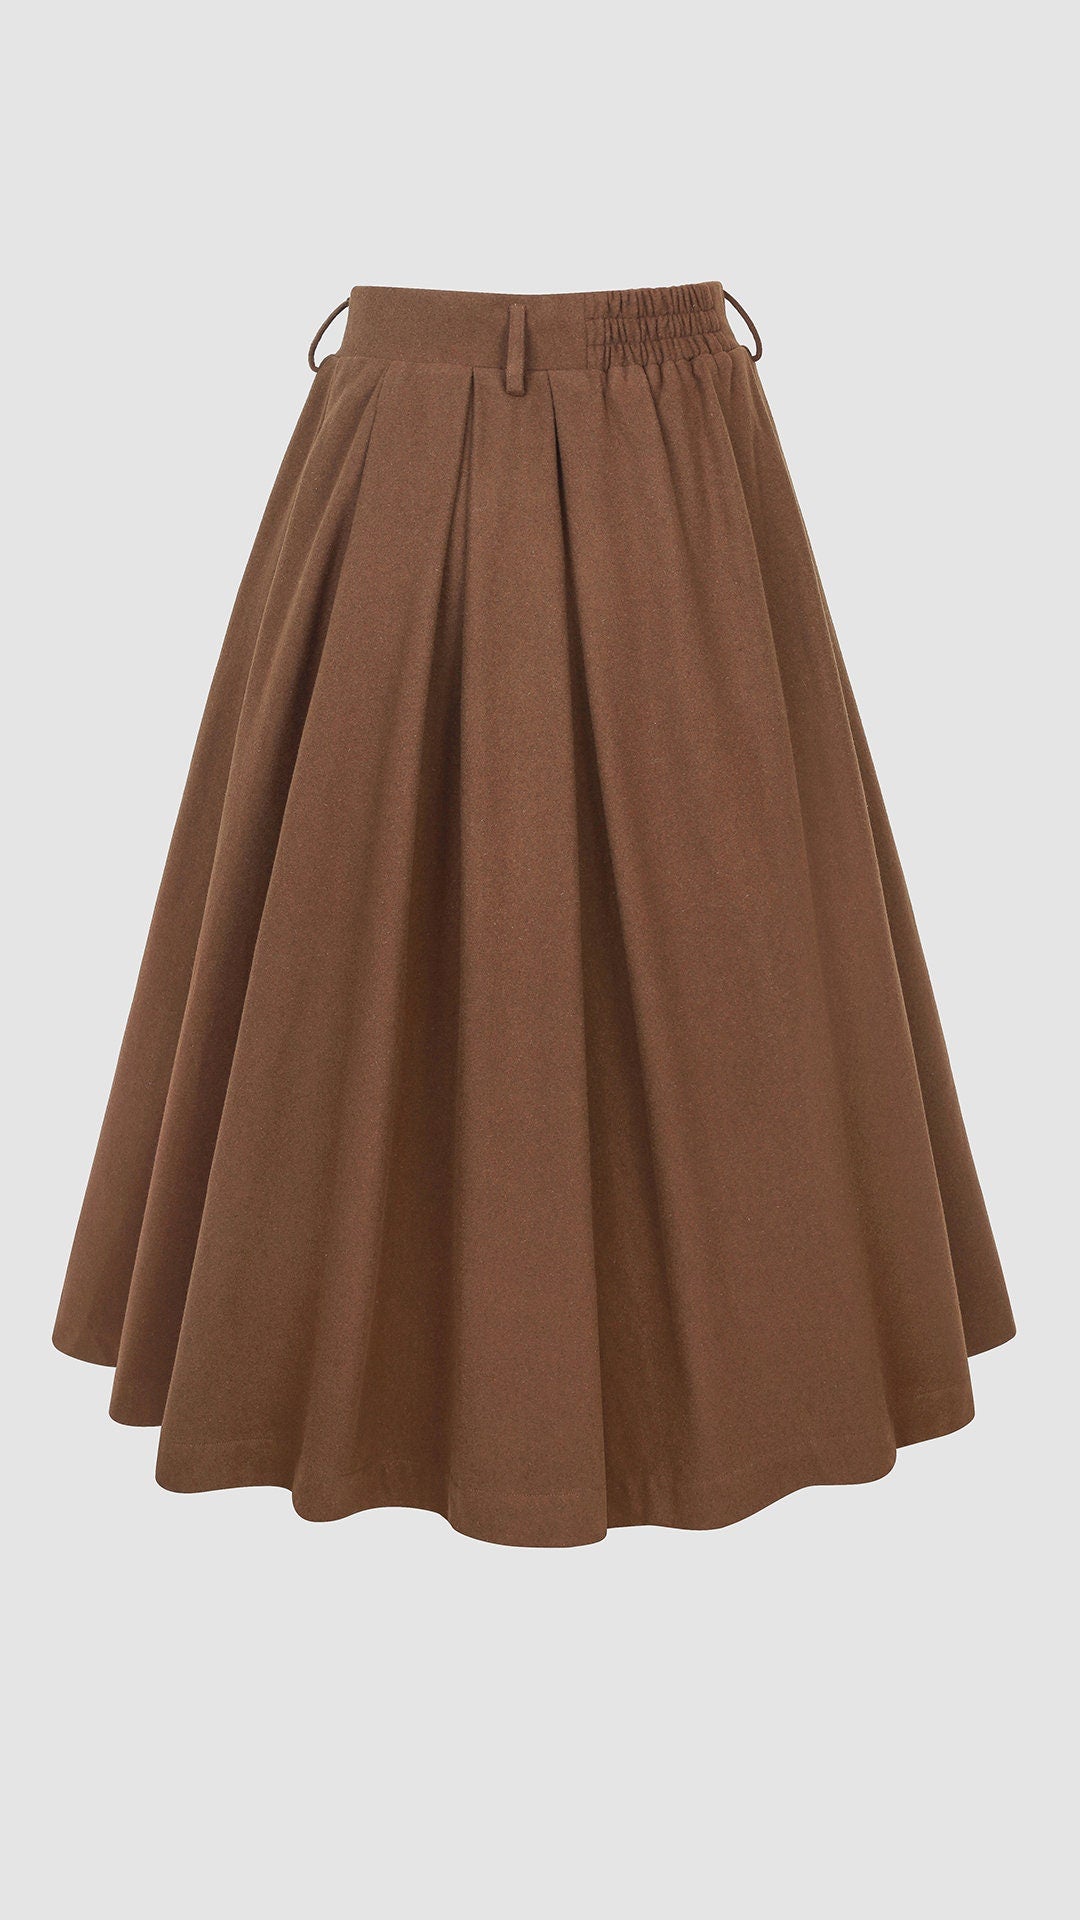 Naomi 33 | buttoned up wool skirt in brown